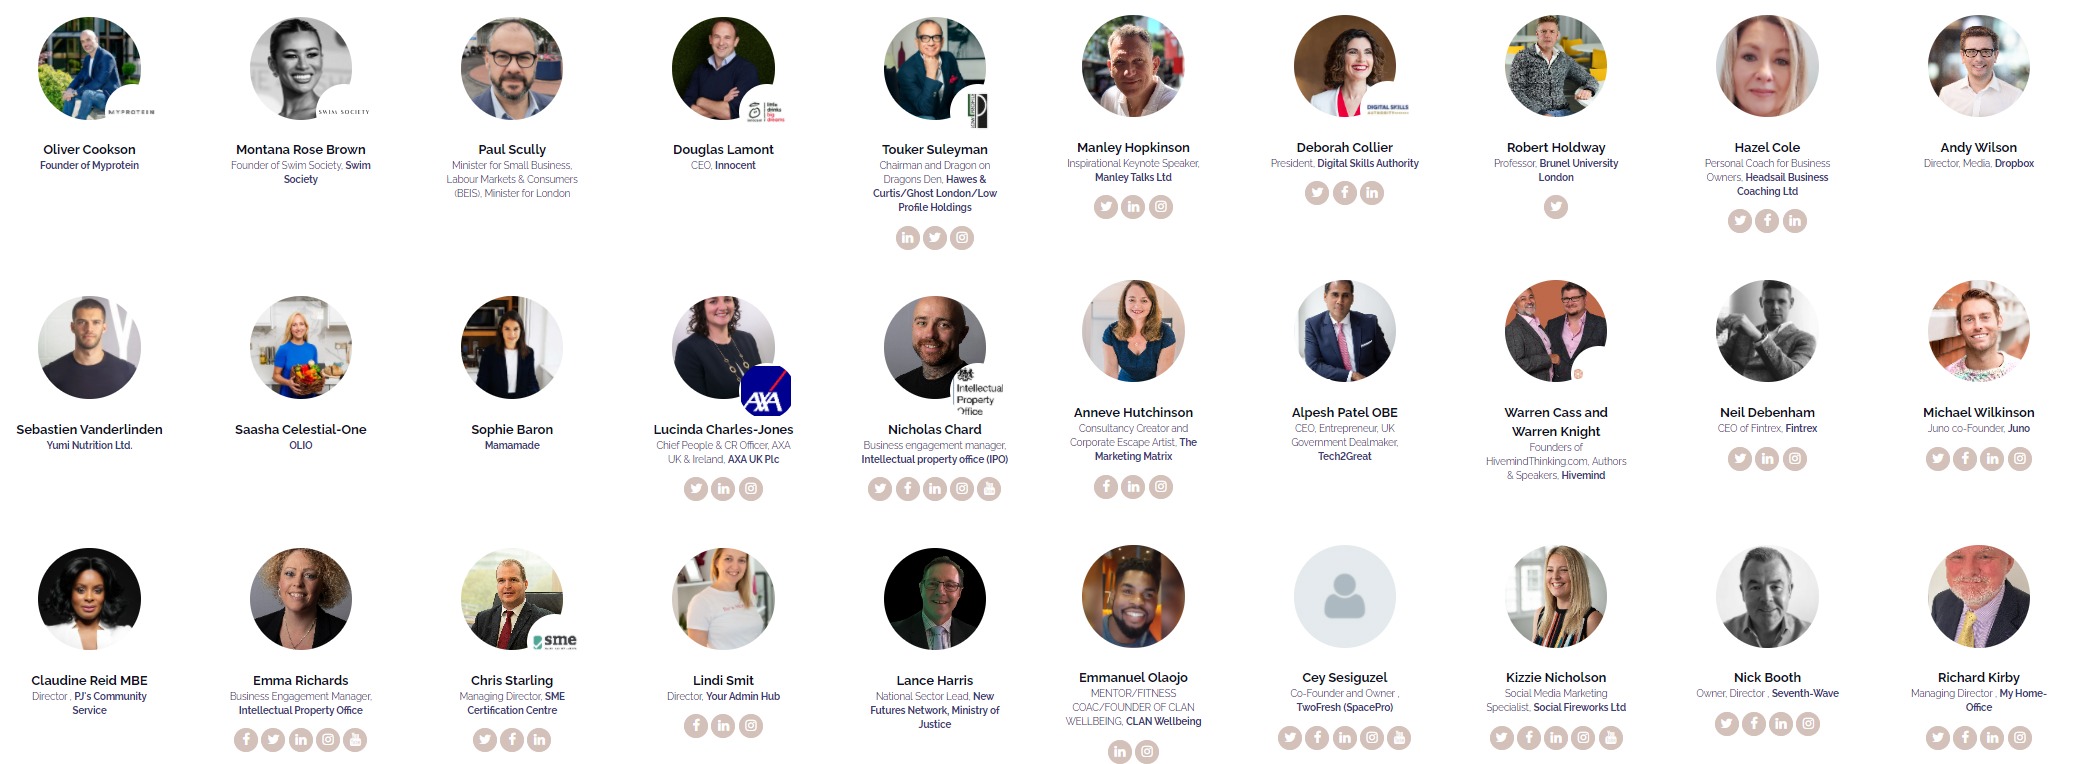 The Business Show 2021 - Speakers of the one of the Top eCommerce Conferences